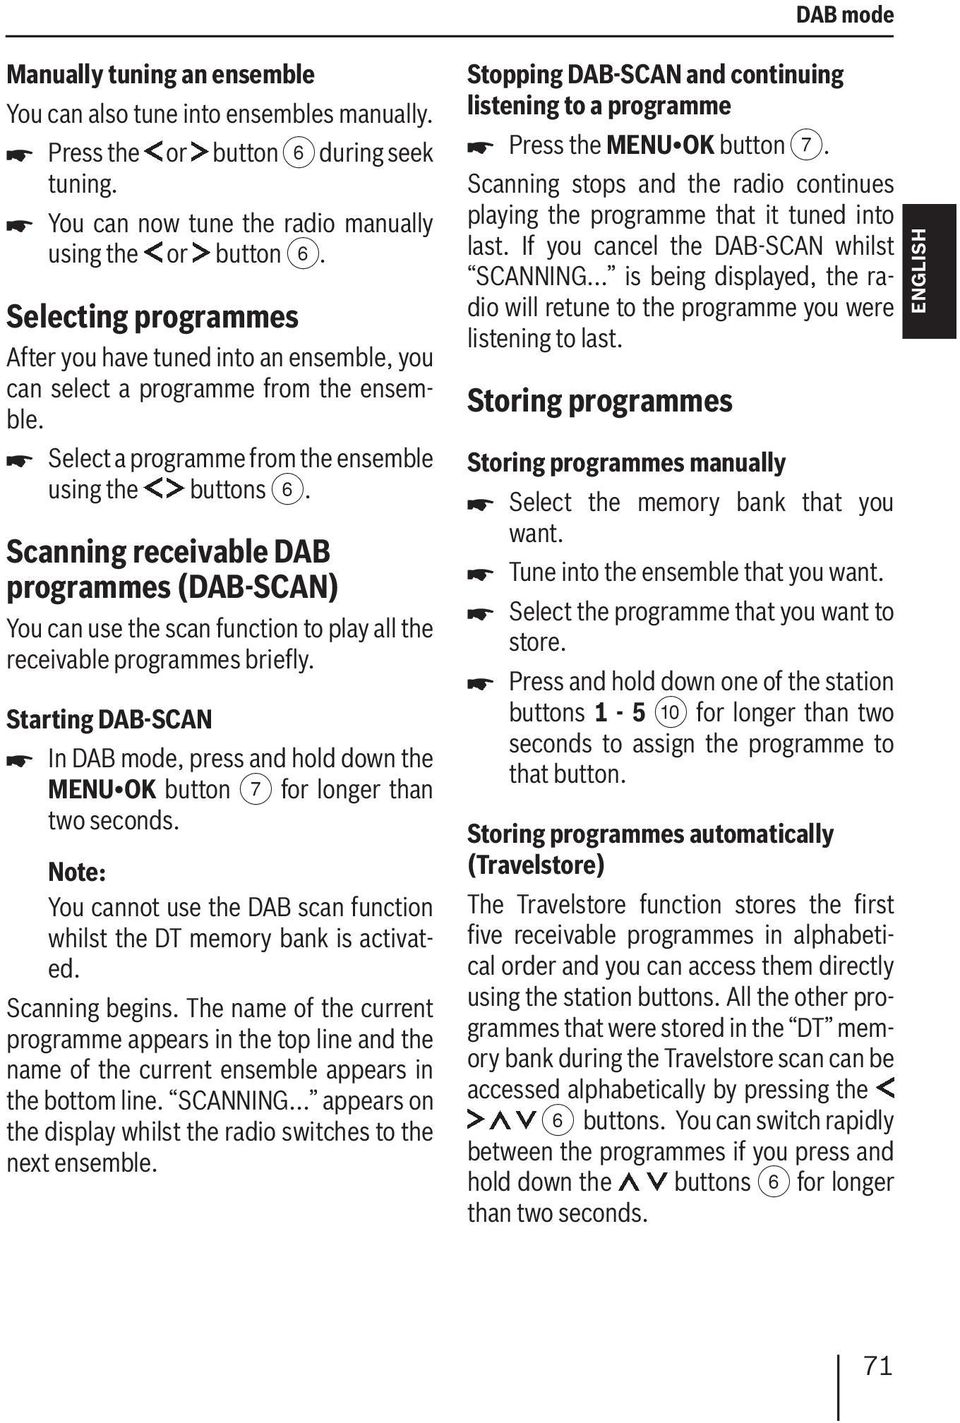 Scanning receivable DAB programmes (DAB-SCAN) You can use the scan function to play all the receivable programmes briefly.